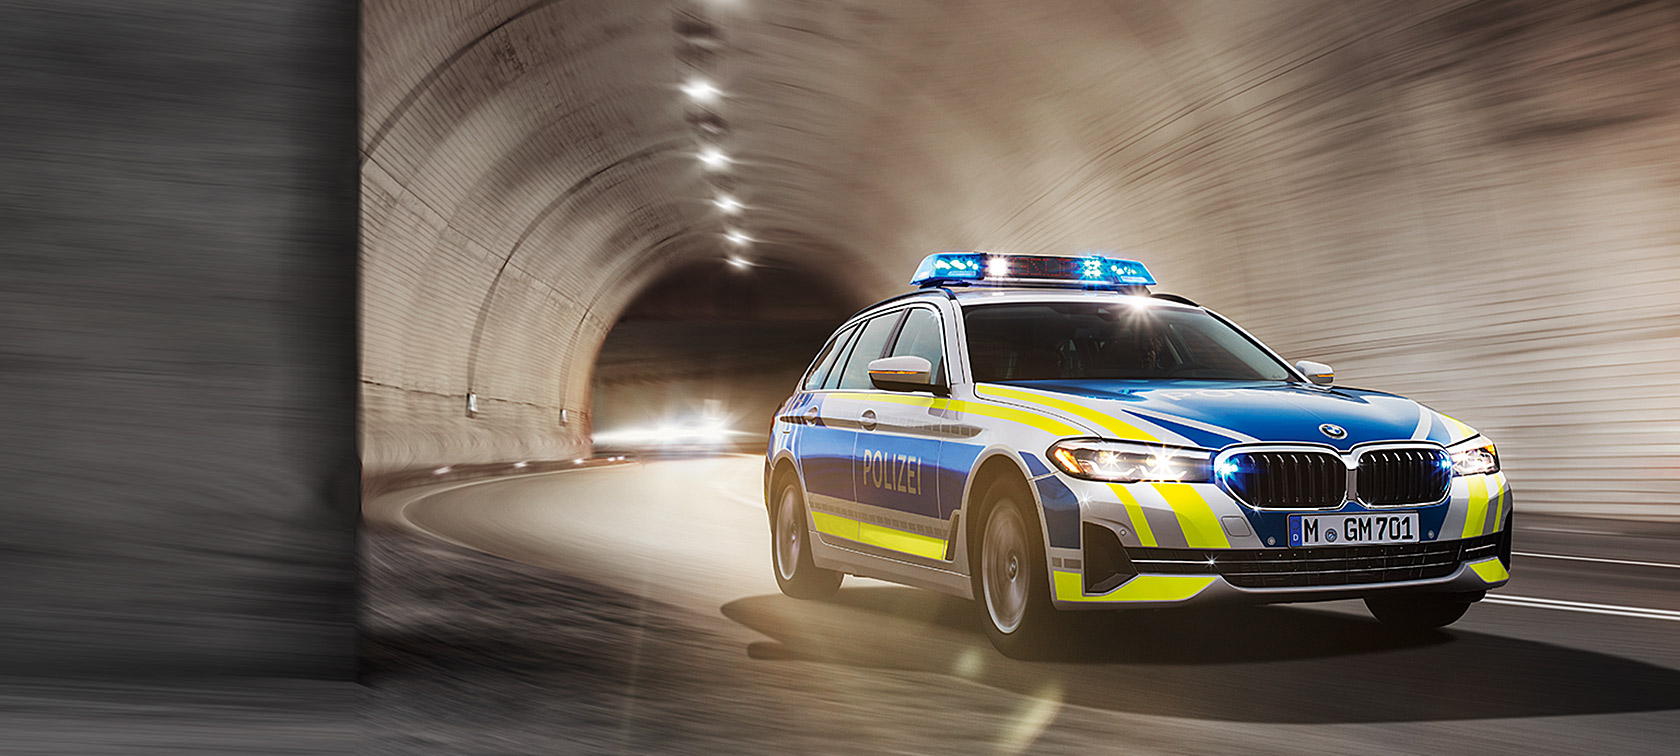 BMW 5series Touring G31LCI police vehicle 1/3 front view tunnel driving